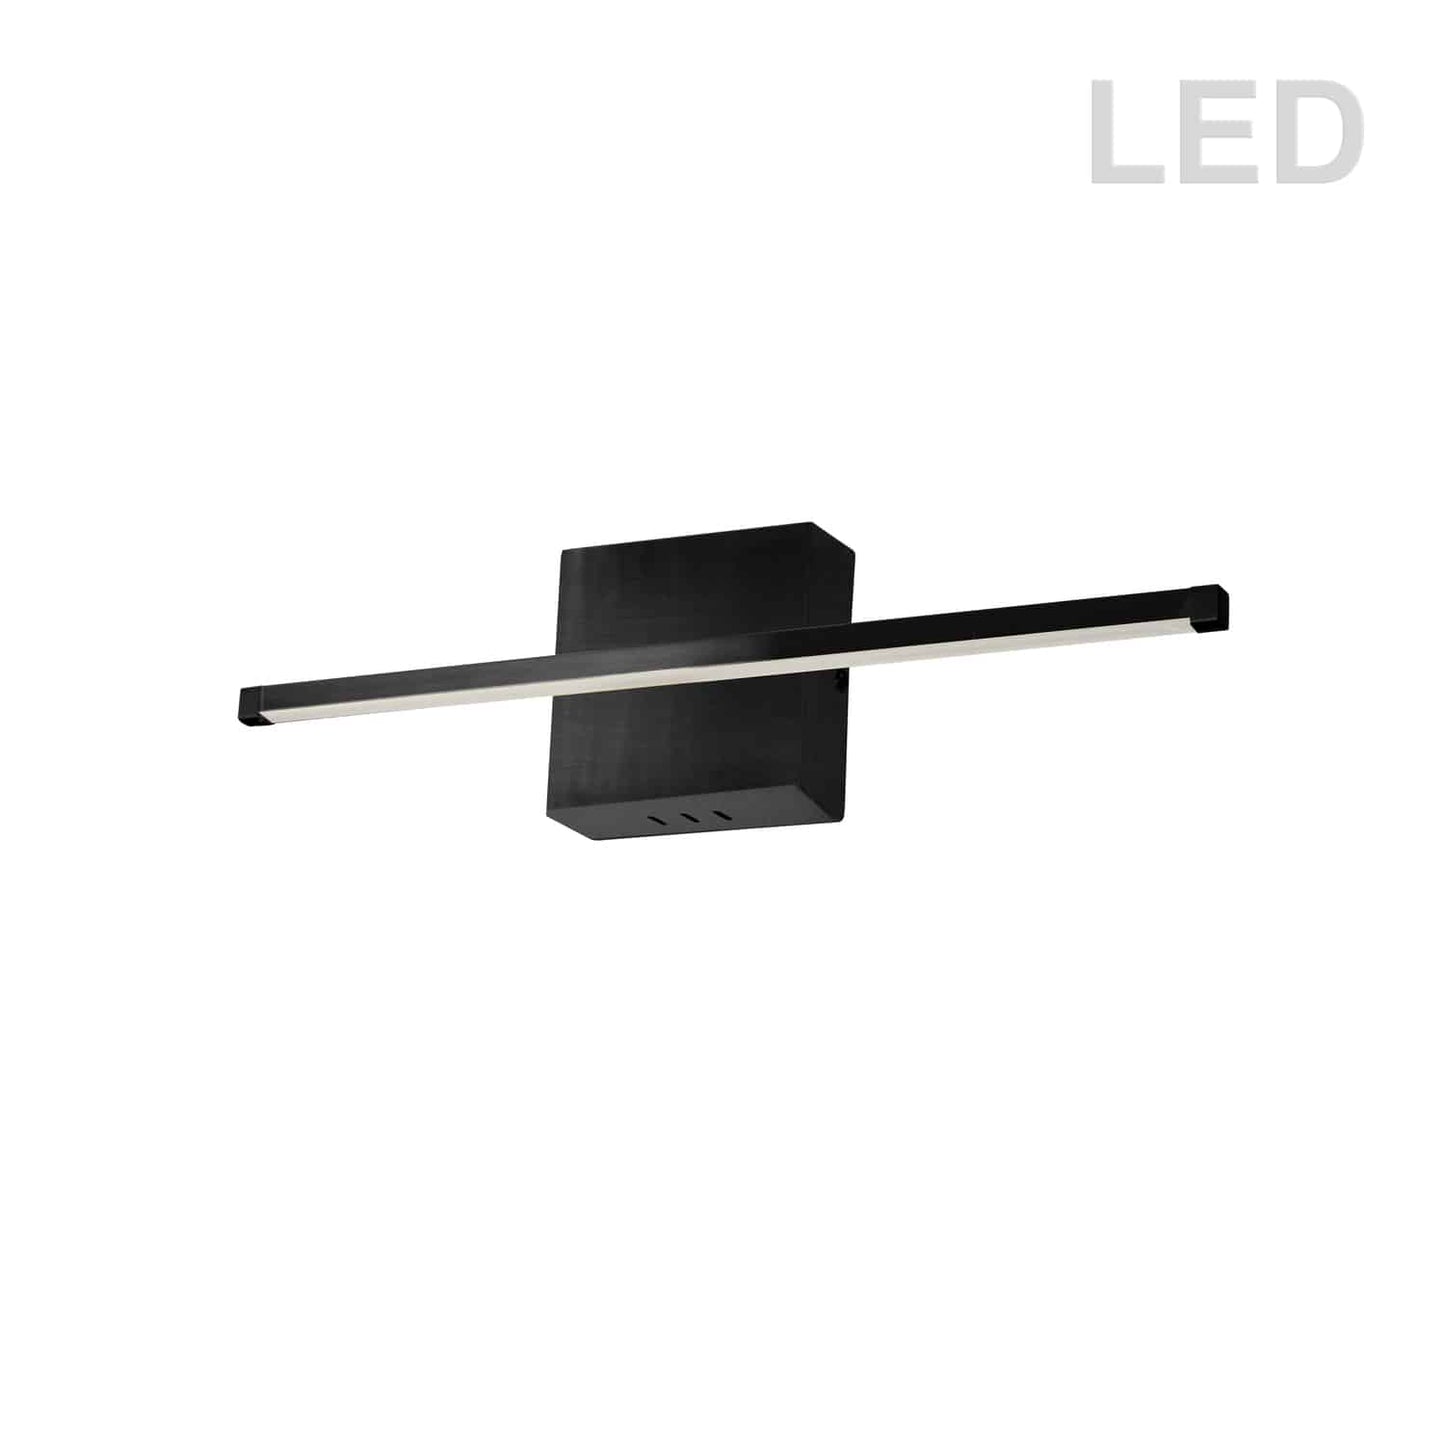 Dainolite ARY-2419LEDW-MB 19W LED Wall Sconce, Matte Black with White Acrylic Diffuser